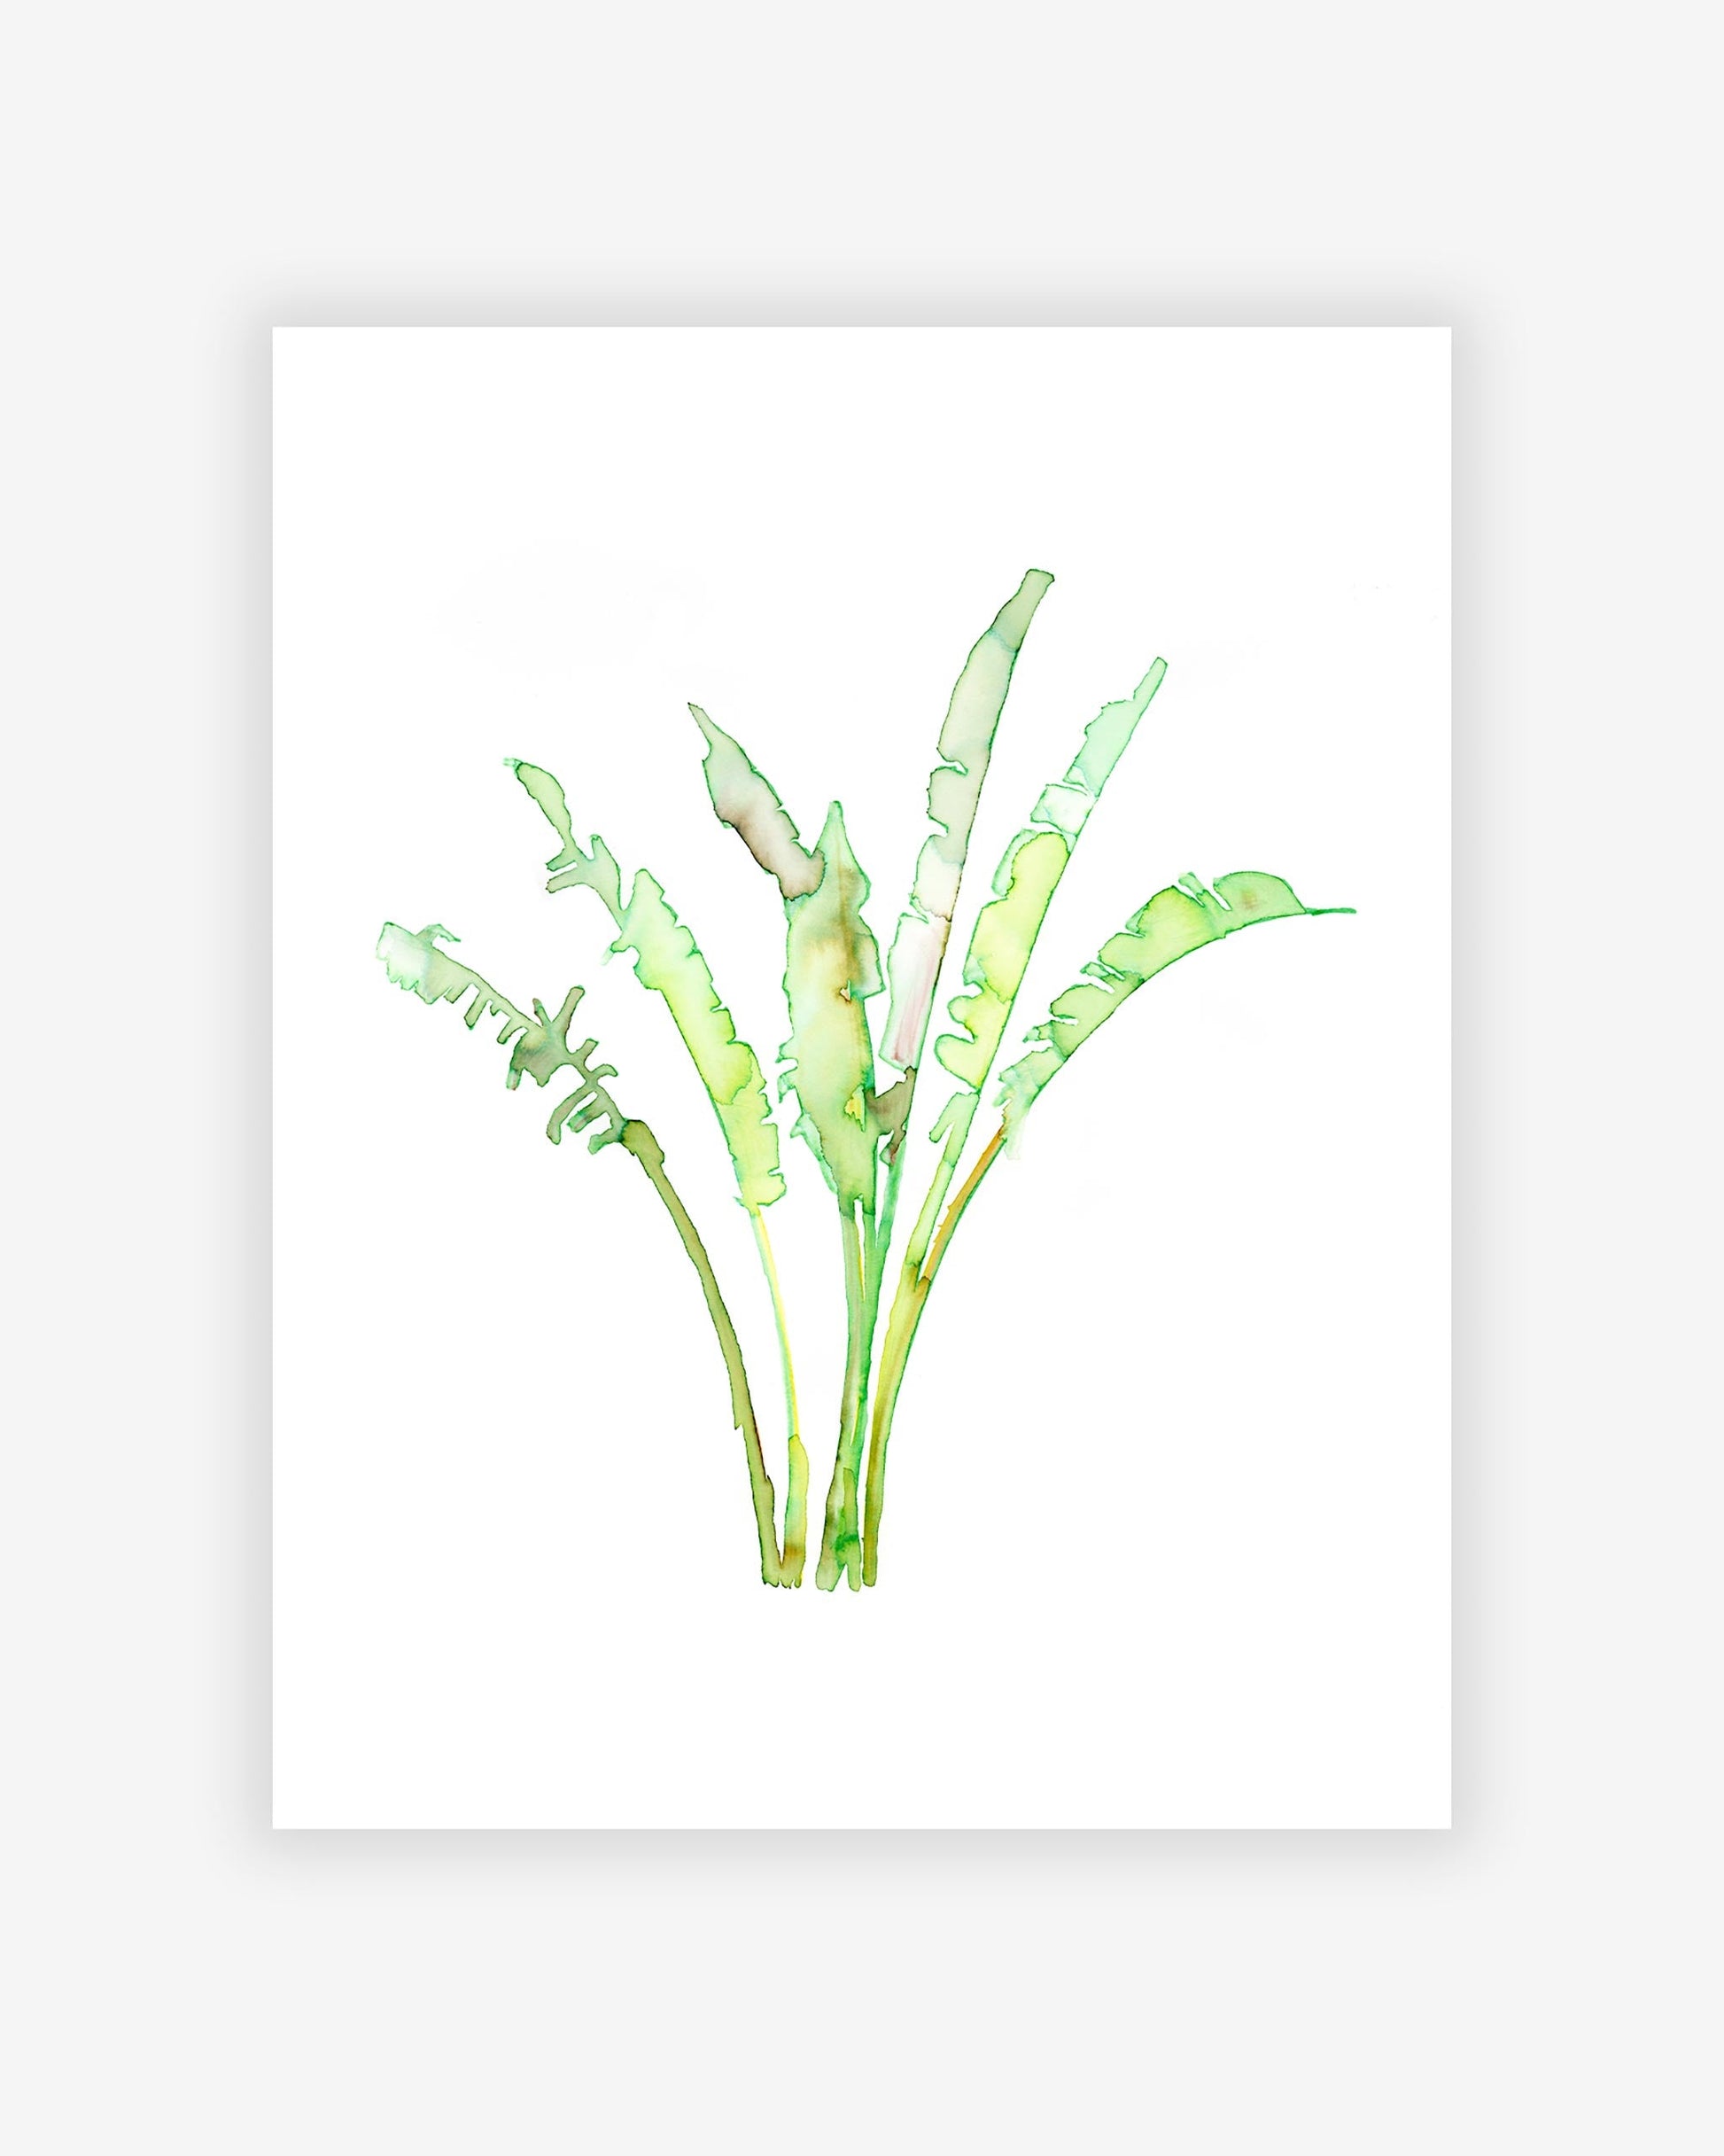 A Rain Catch print of a green plant by Eskayel founder, an artist known for creating original artworks, on a white background